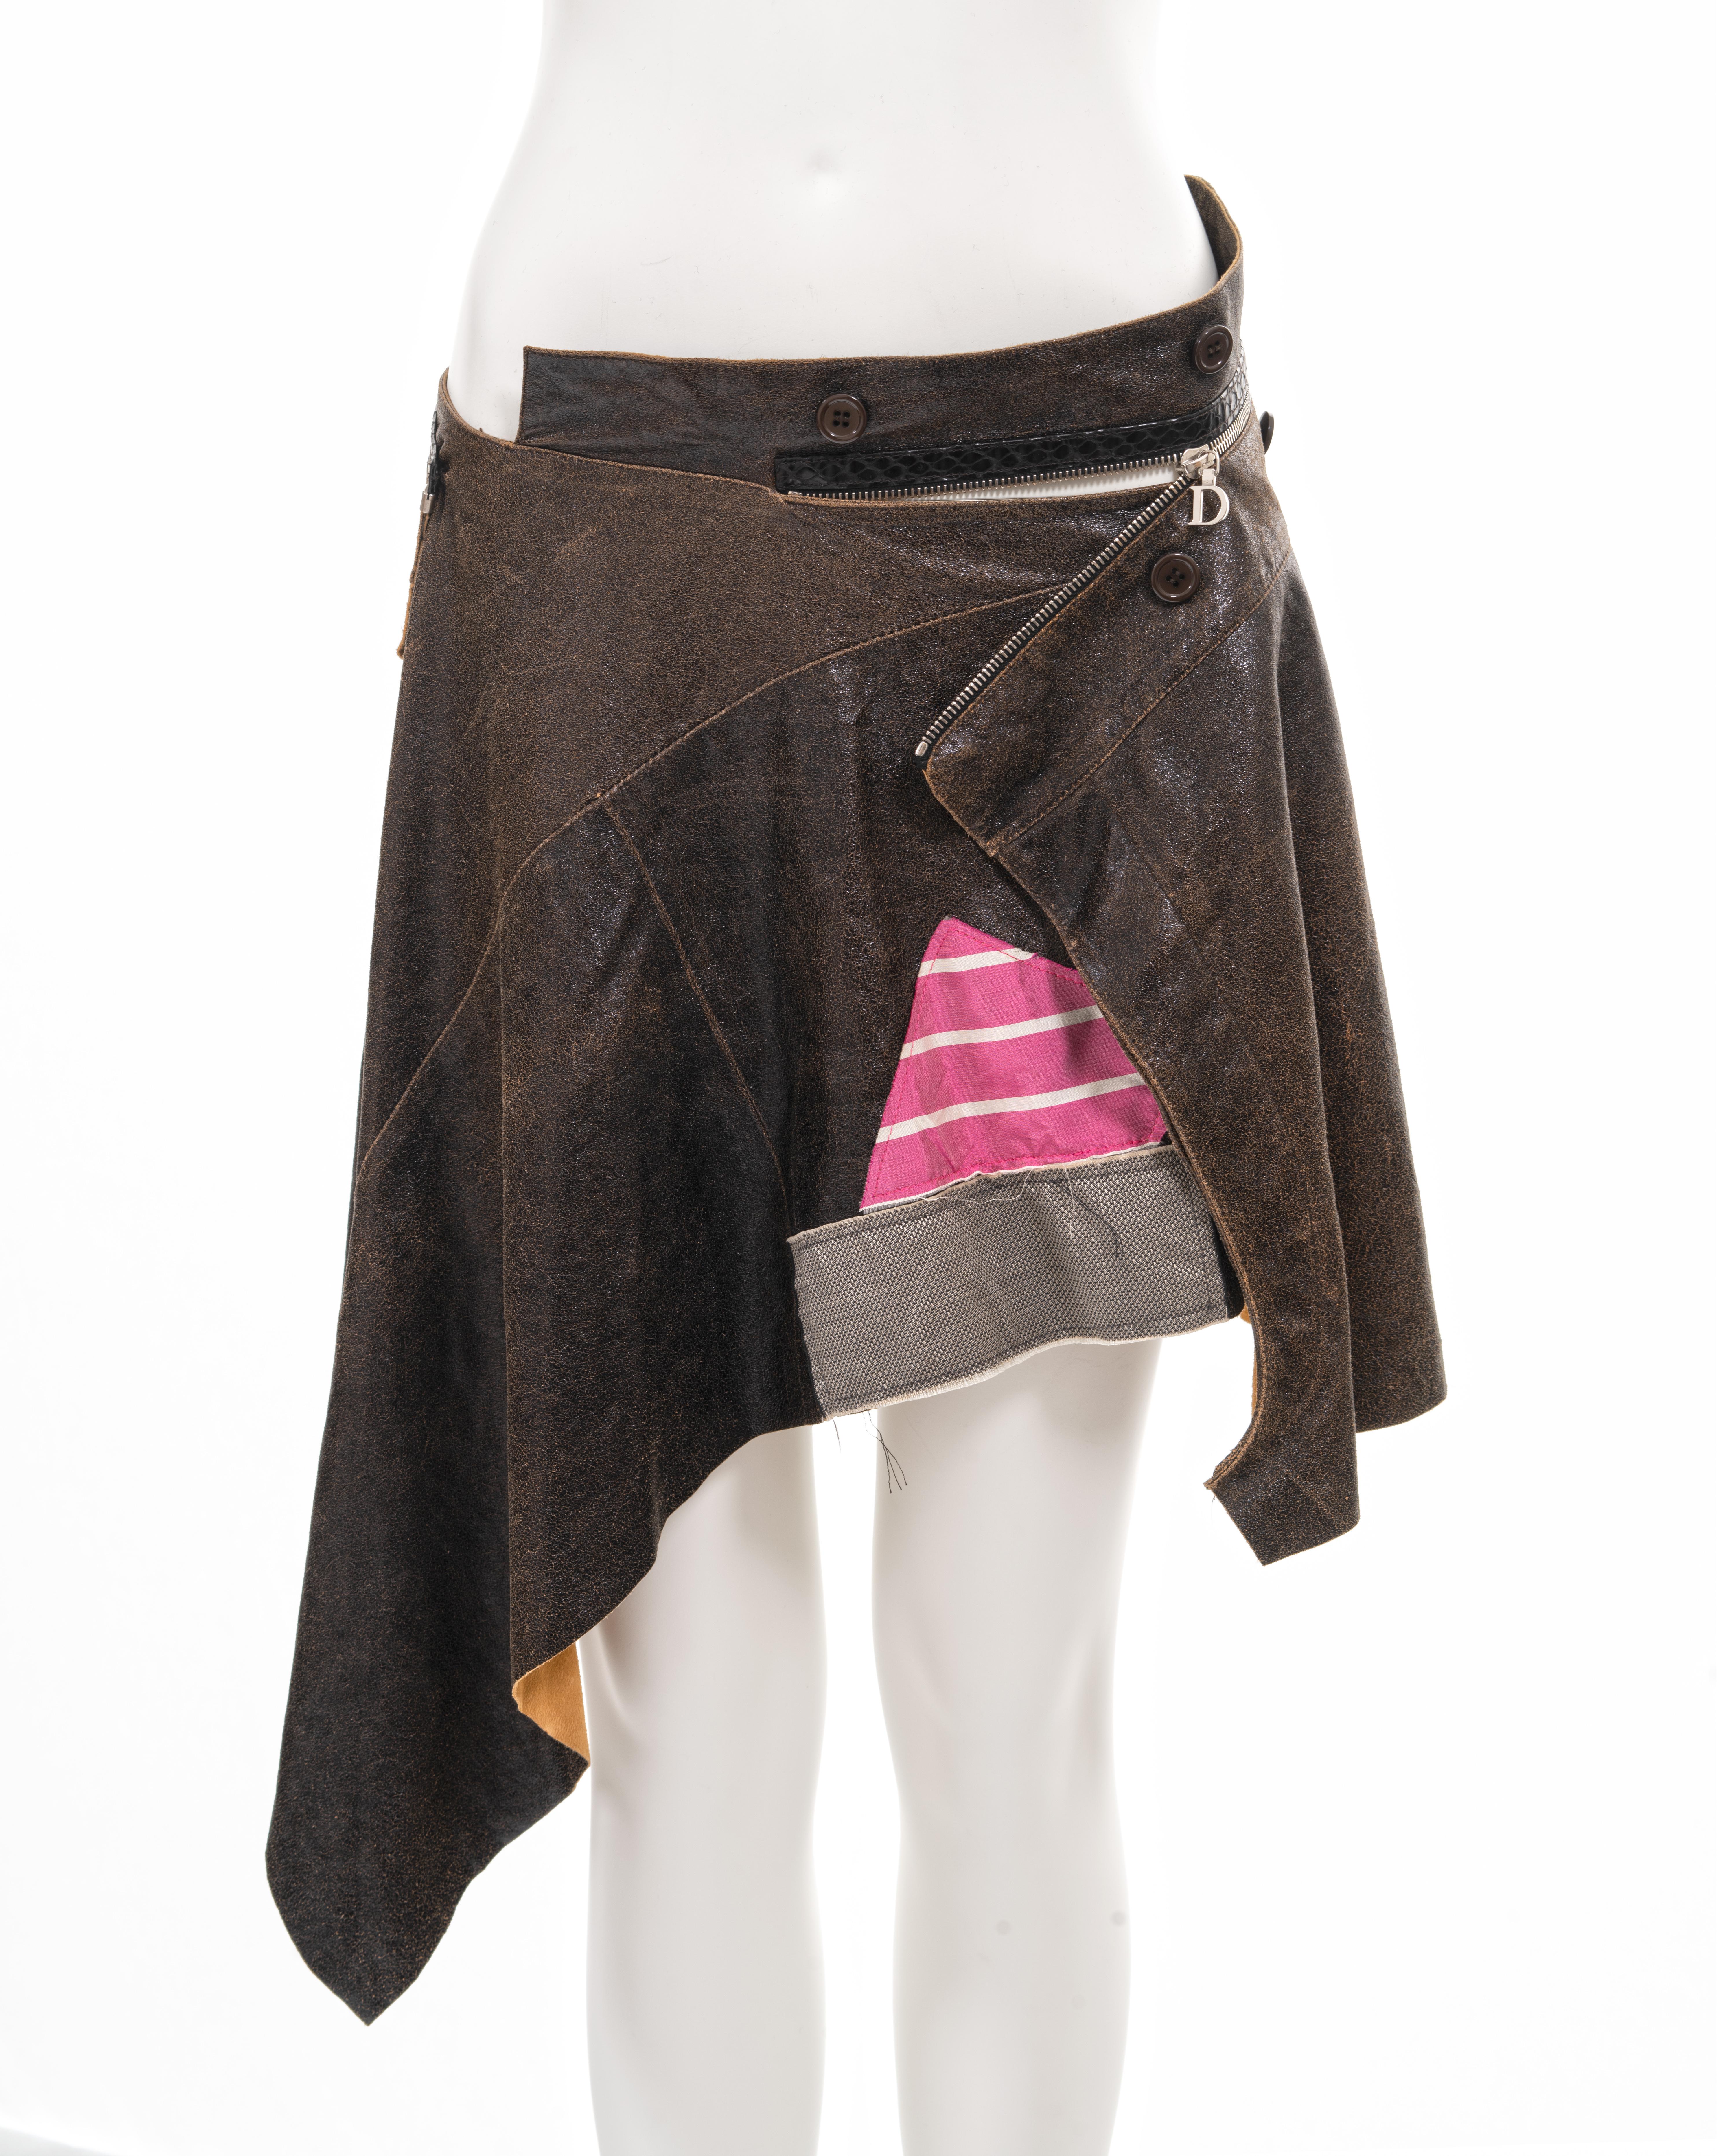 ▪ Christian Dior deconstructed leather wrap skirt 
▪ Creative Director: John Galliano
▪ Spring-Summer 2001 
▪ Constructed from brown distressed leather 
▪ Convertible zipper with Dior 'D' zip pull 
▪ Black snakeskin trim 
▪ Assortment of square